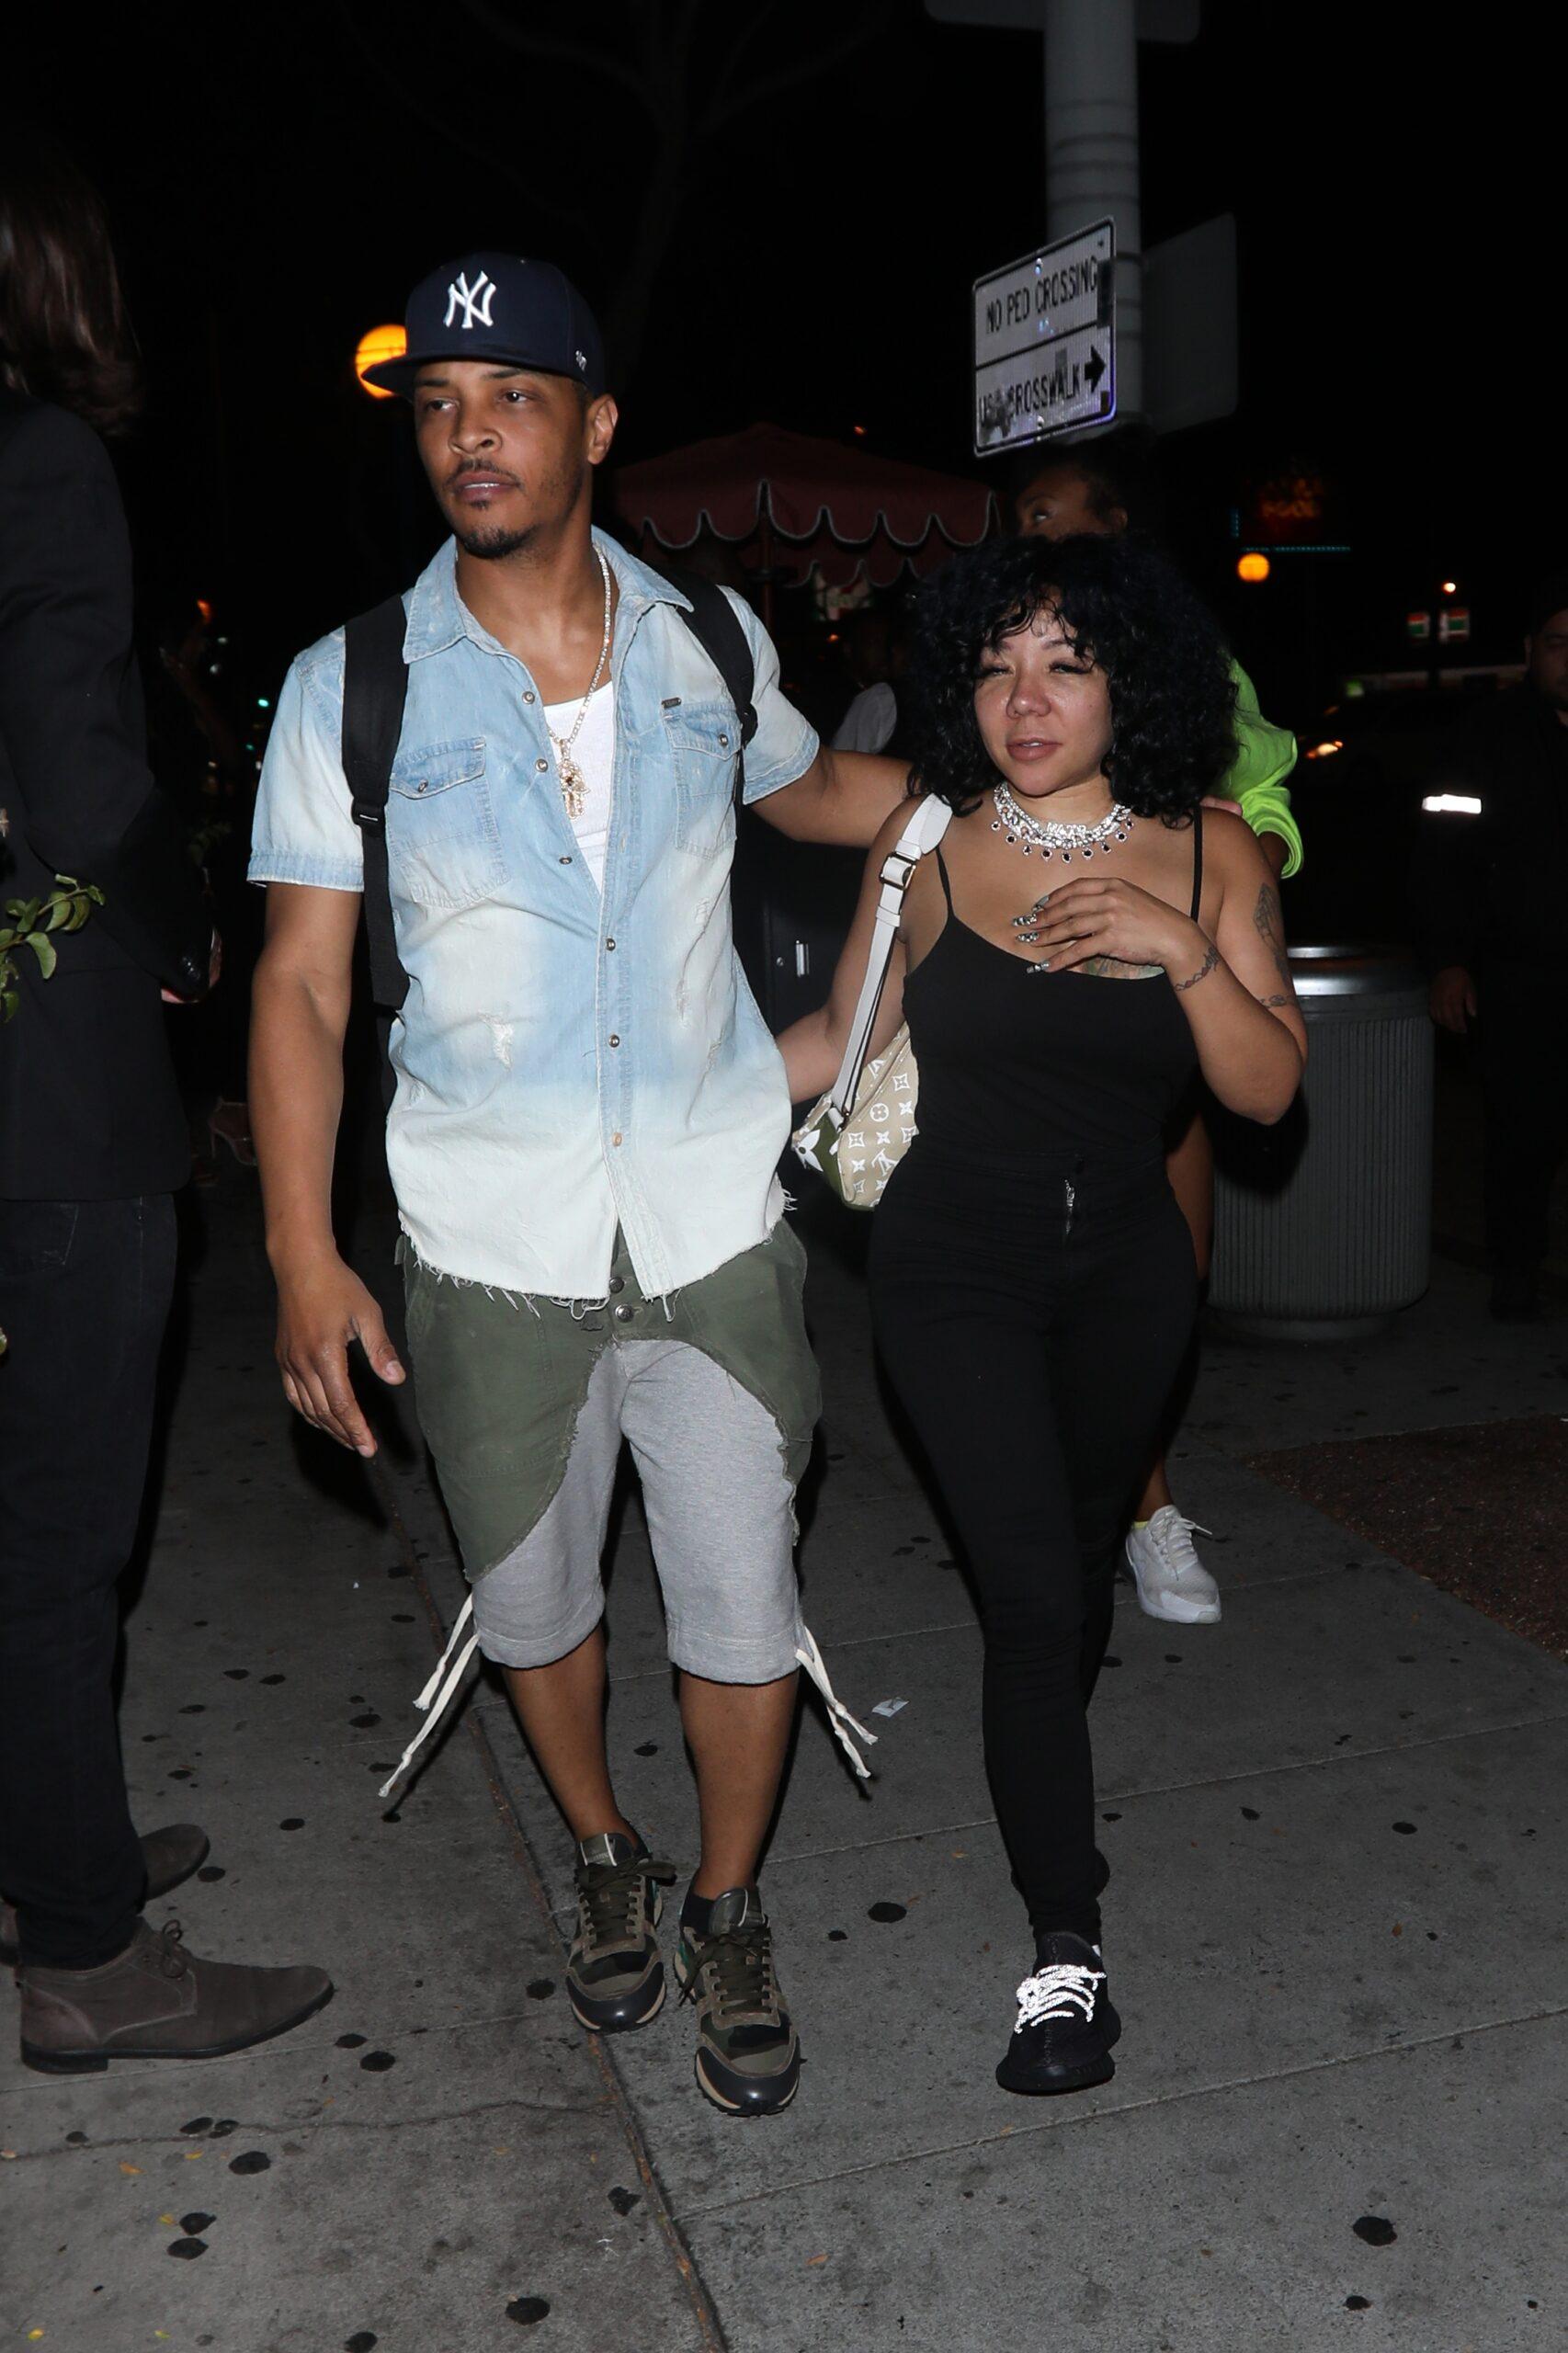 Rapper T.I. and wife Tiny are seen leaving the Delilah restaurant